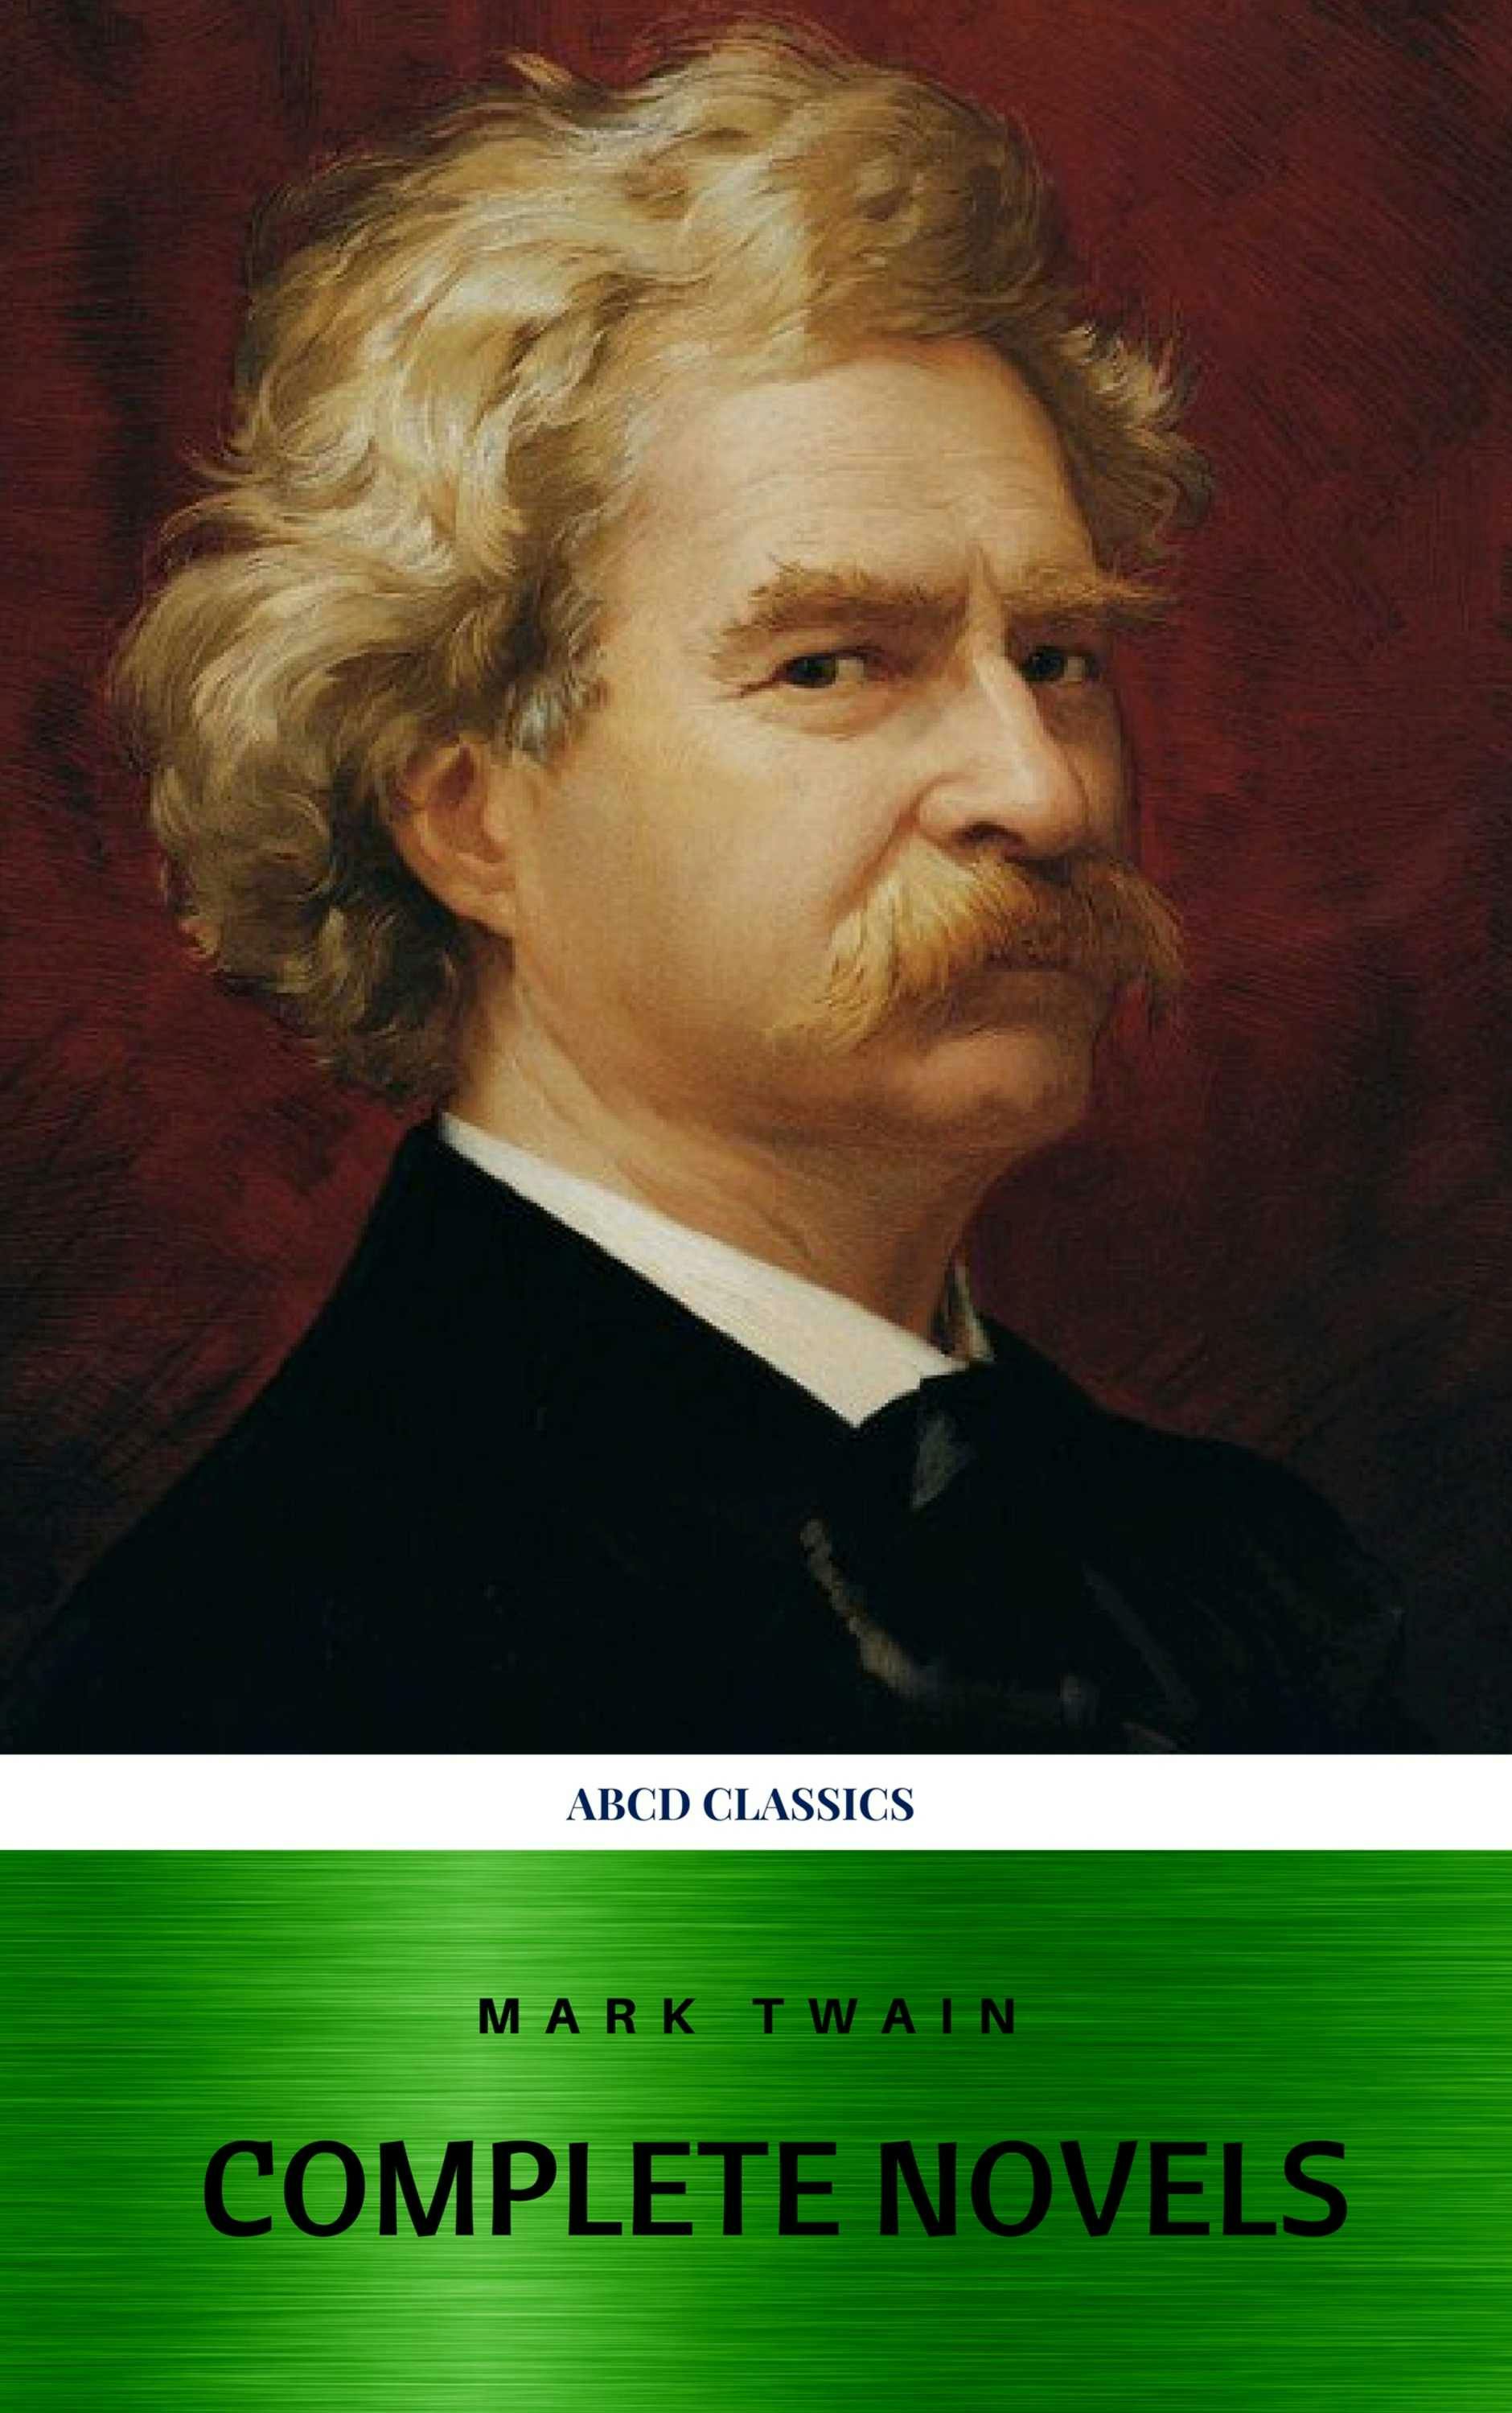 Mark Twain: The Complete Novels (XVII Classics) (The Greatest Writers of All Time) Included Bonus + Active TOC - ABCD Classics, Mark twain